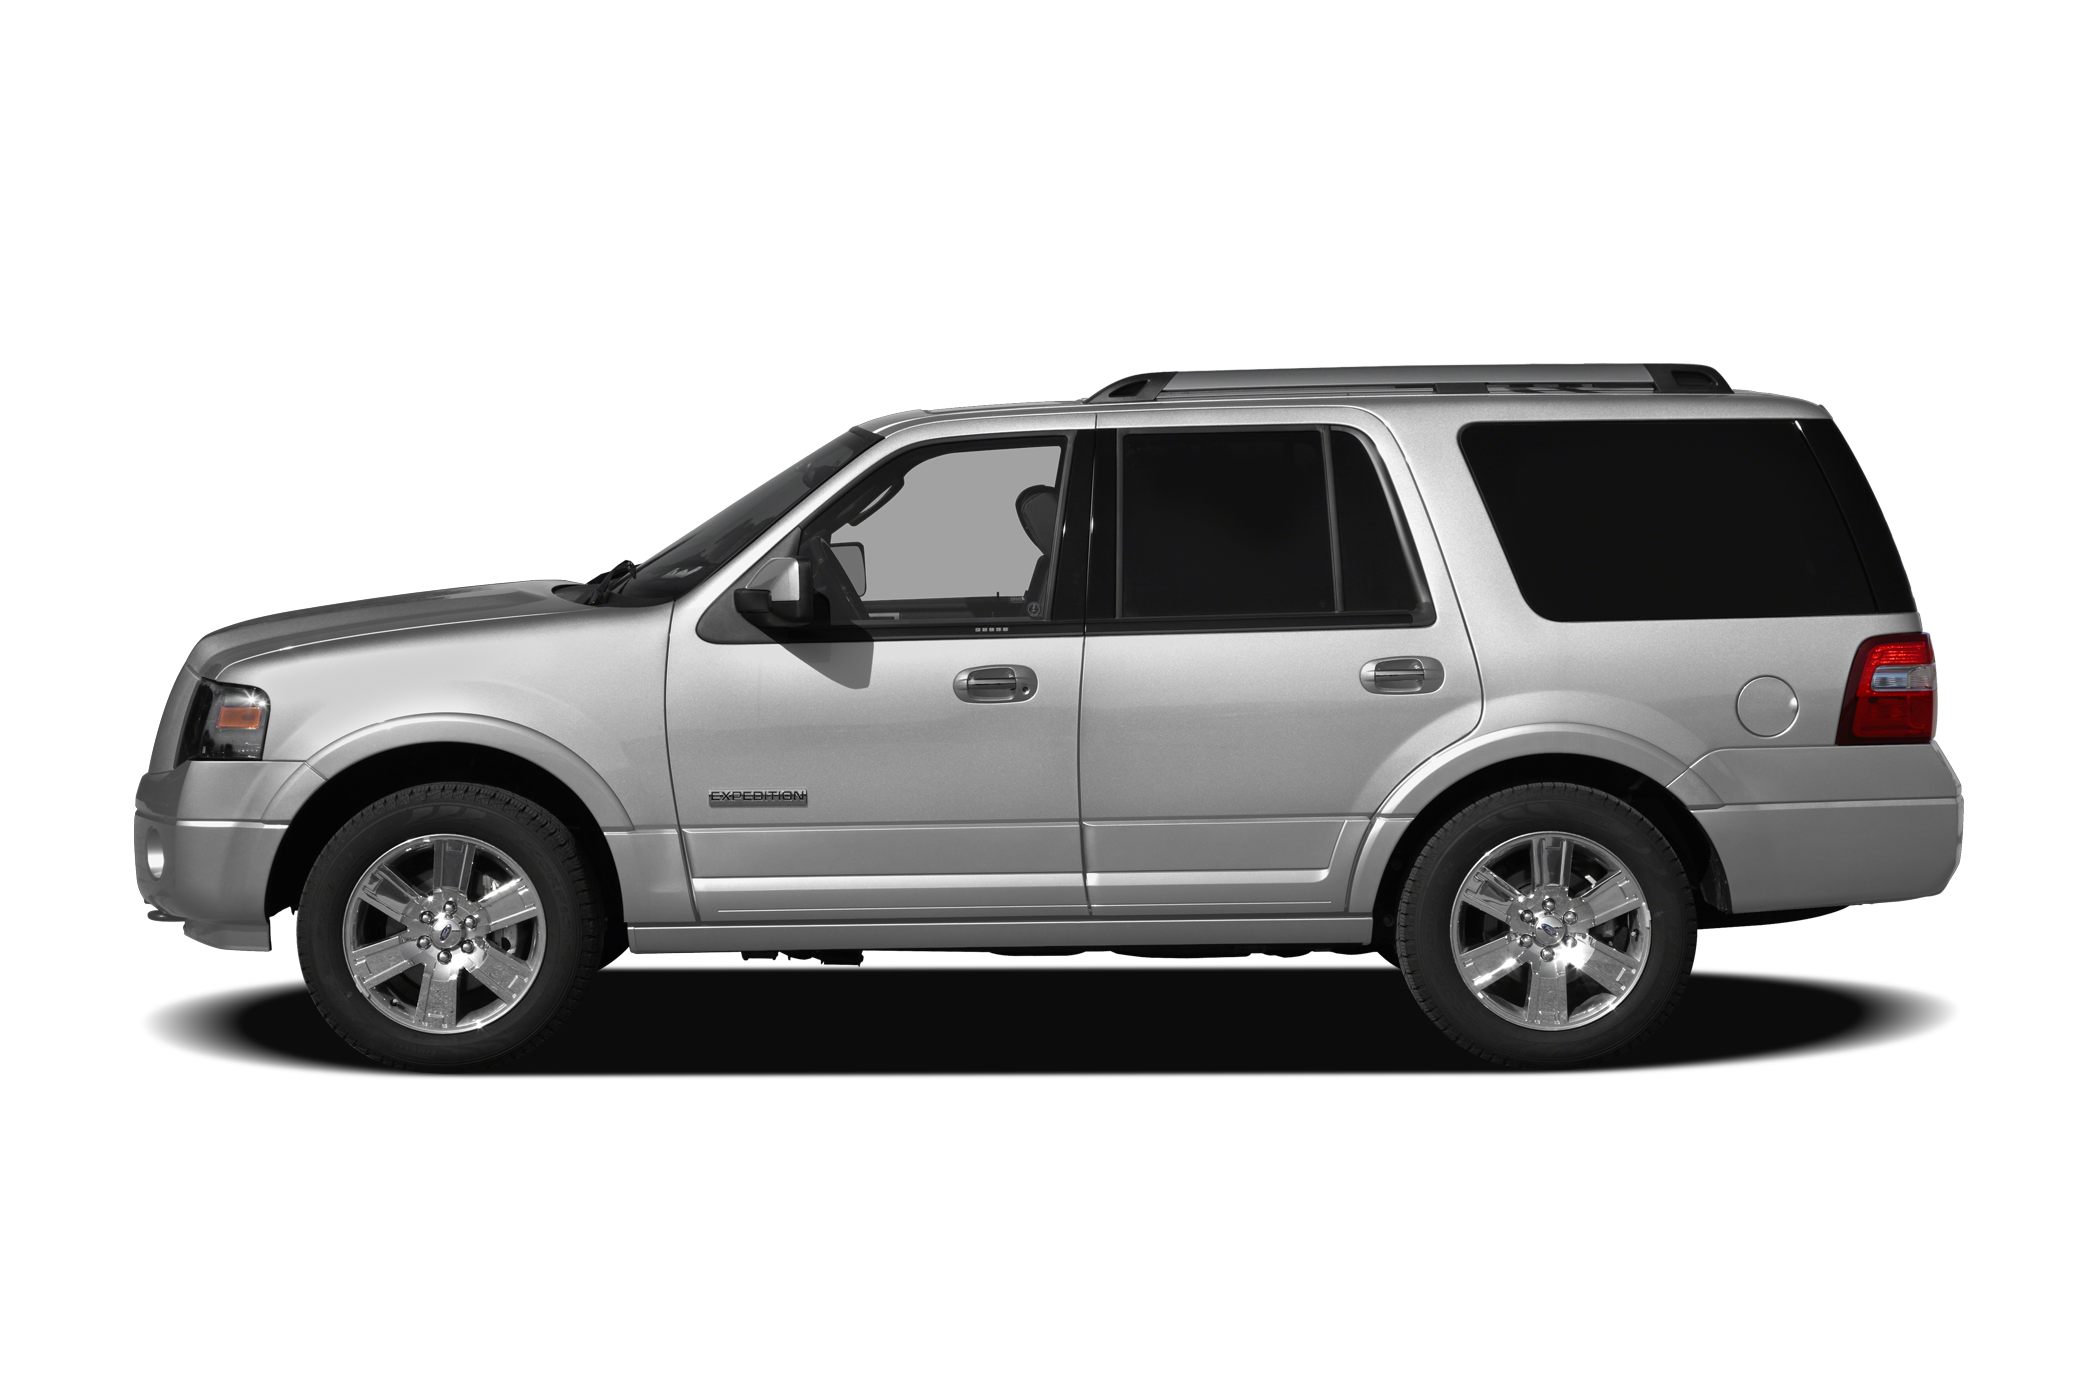 2012 Ford Expedition Pictures